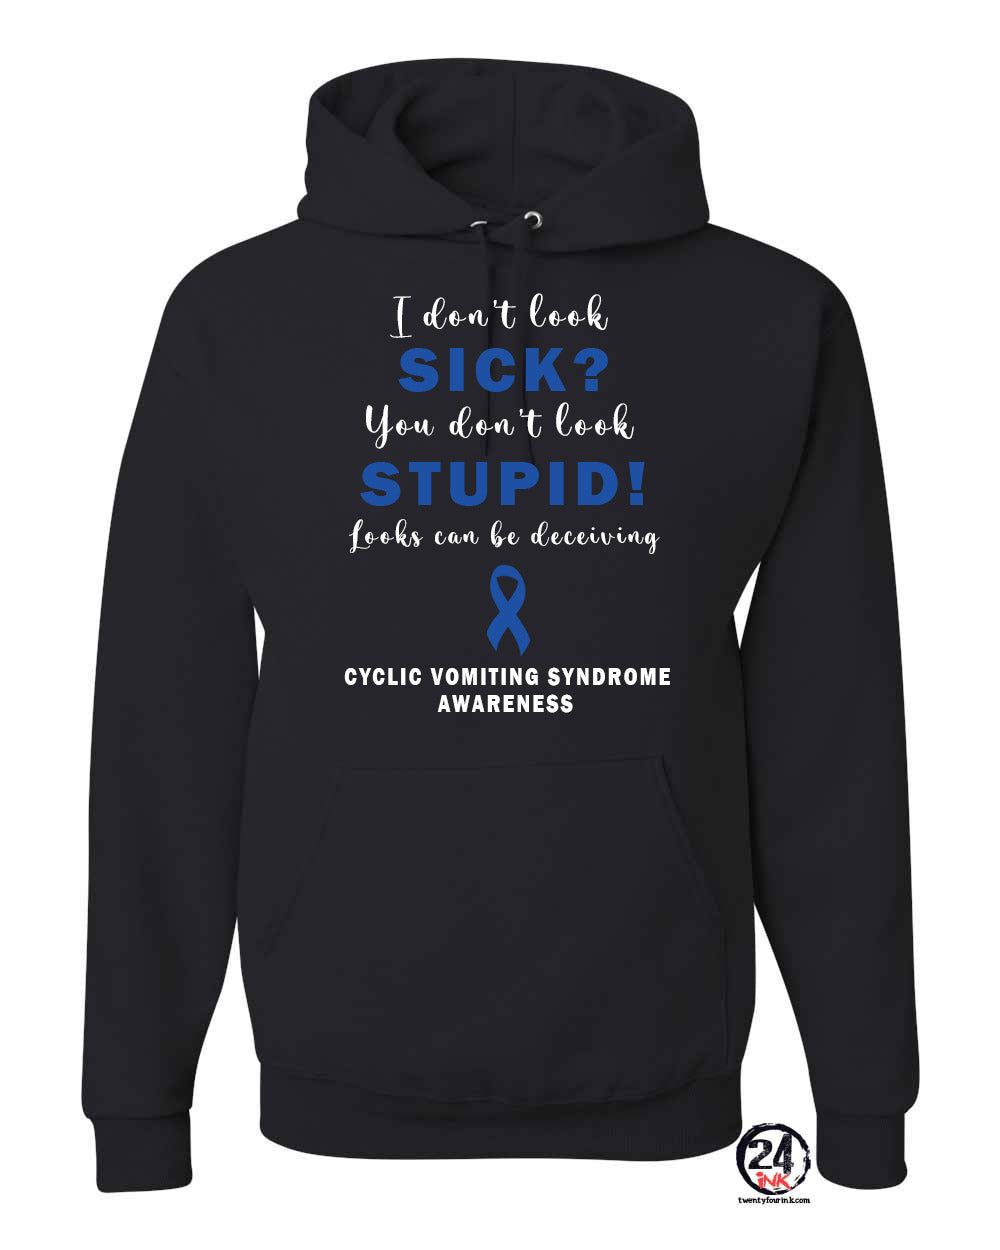 Cyclic Vomiting Syndrome Awareness Hooded Sweatshirt